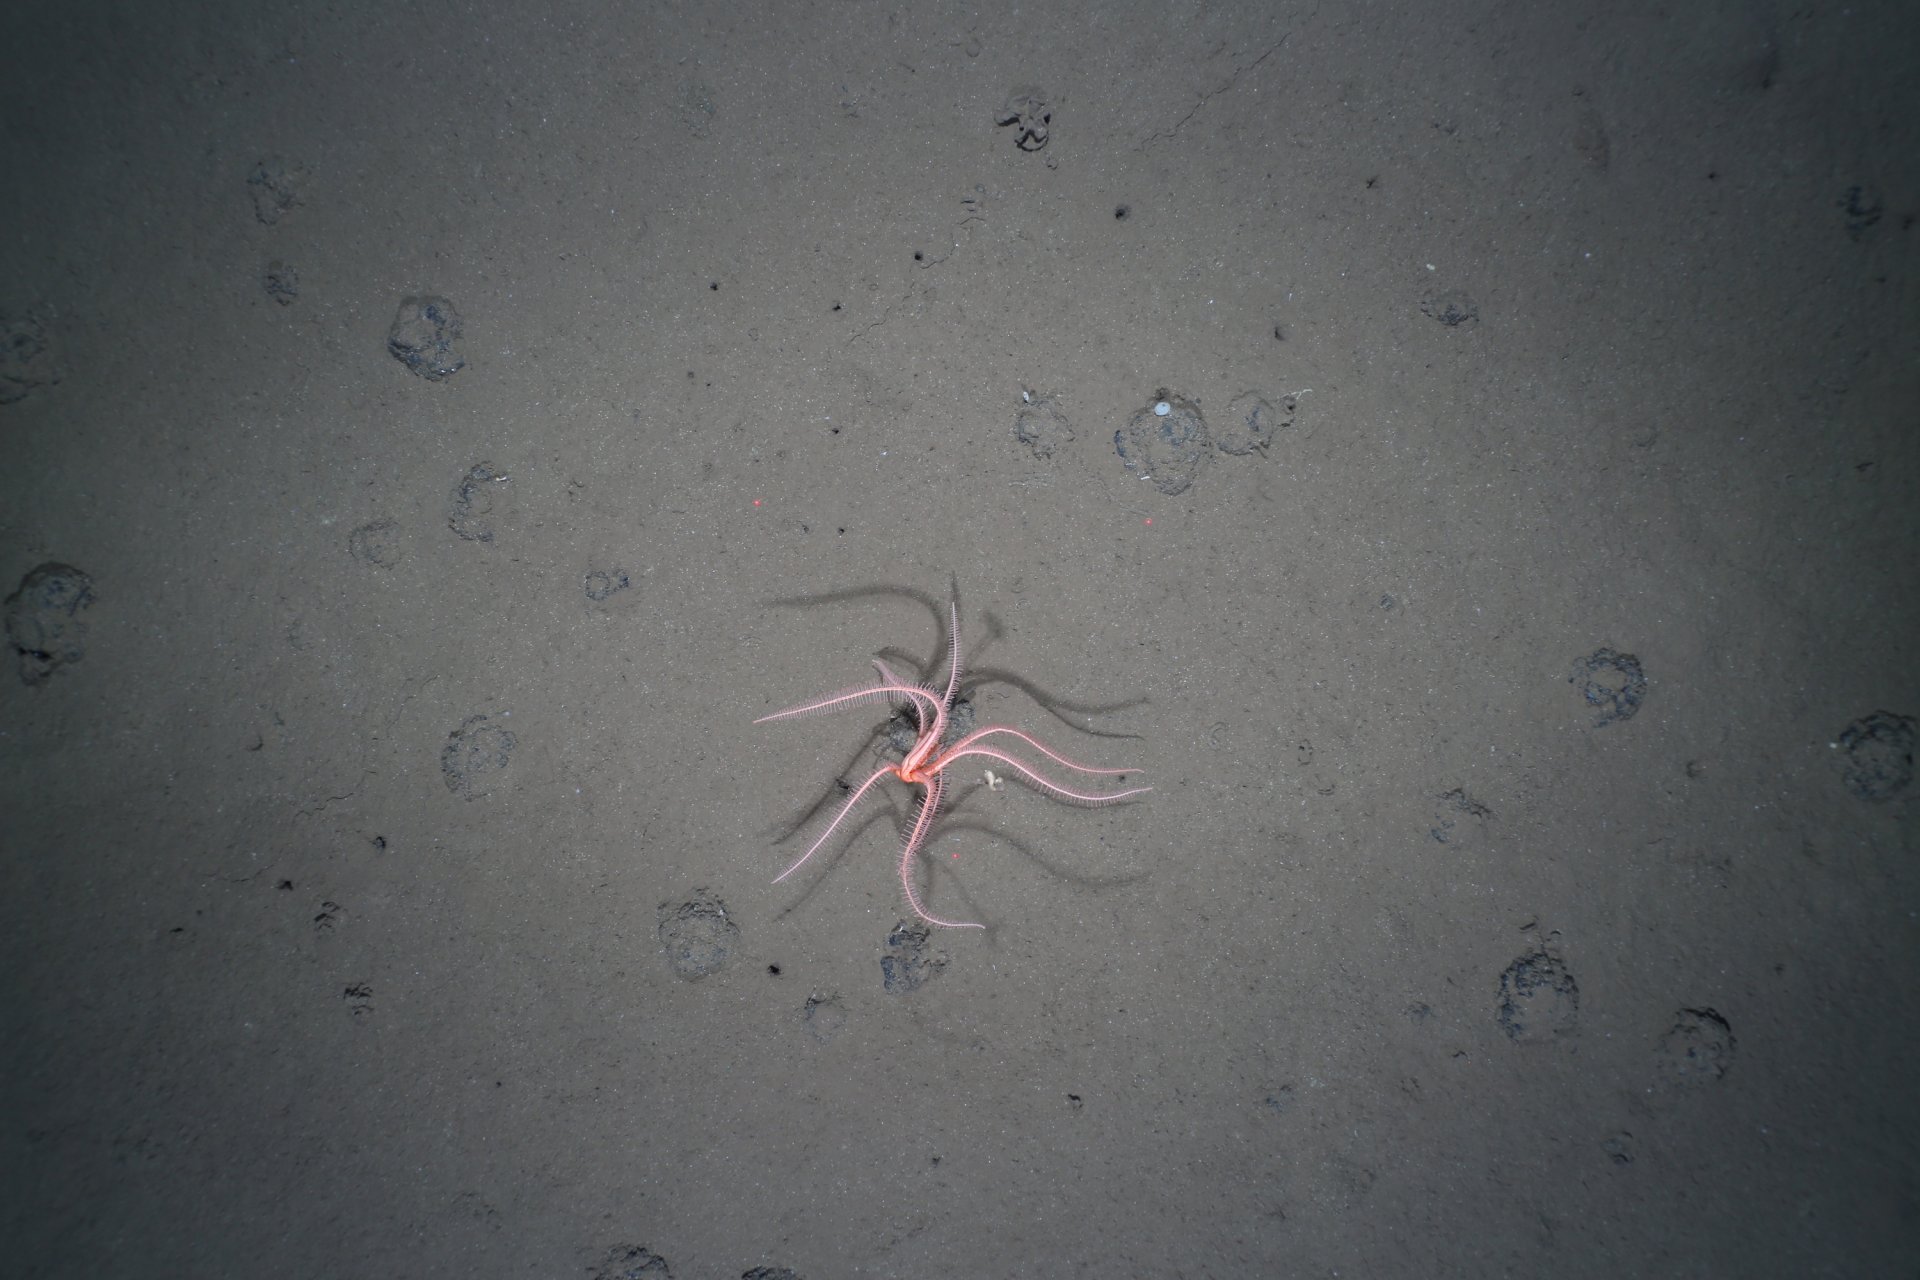 A brisingiid starfish utilises a stalk attached to a nodule to obtain a higher filtering height in the water column. (Source: OFOS-Team/AWI)